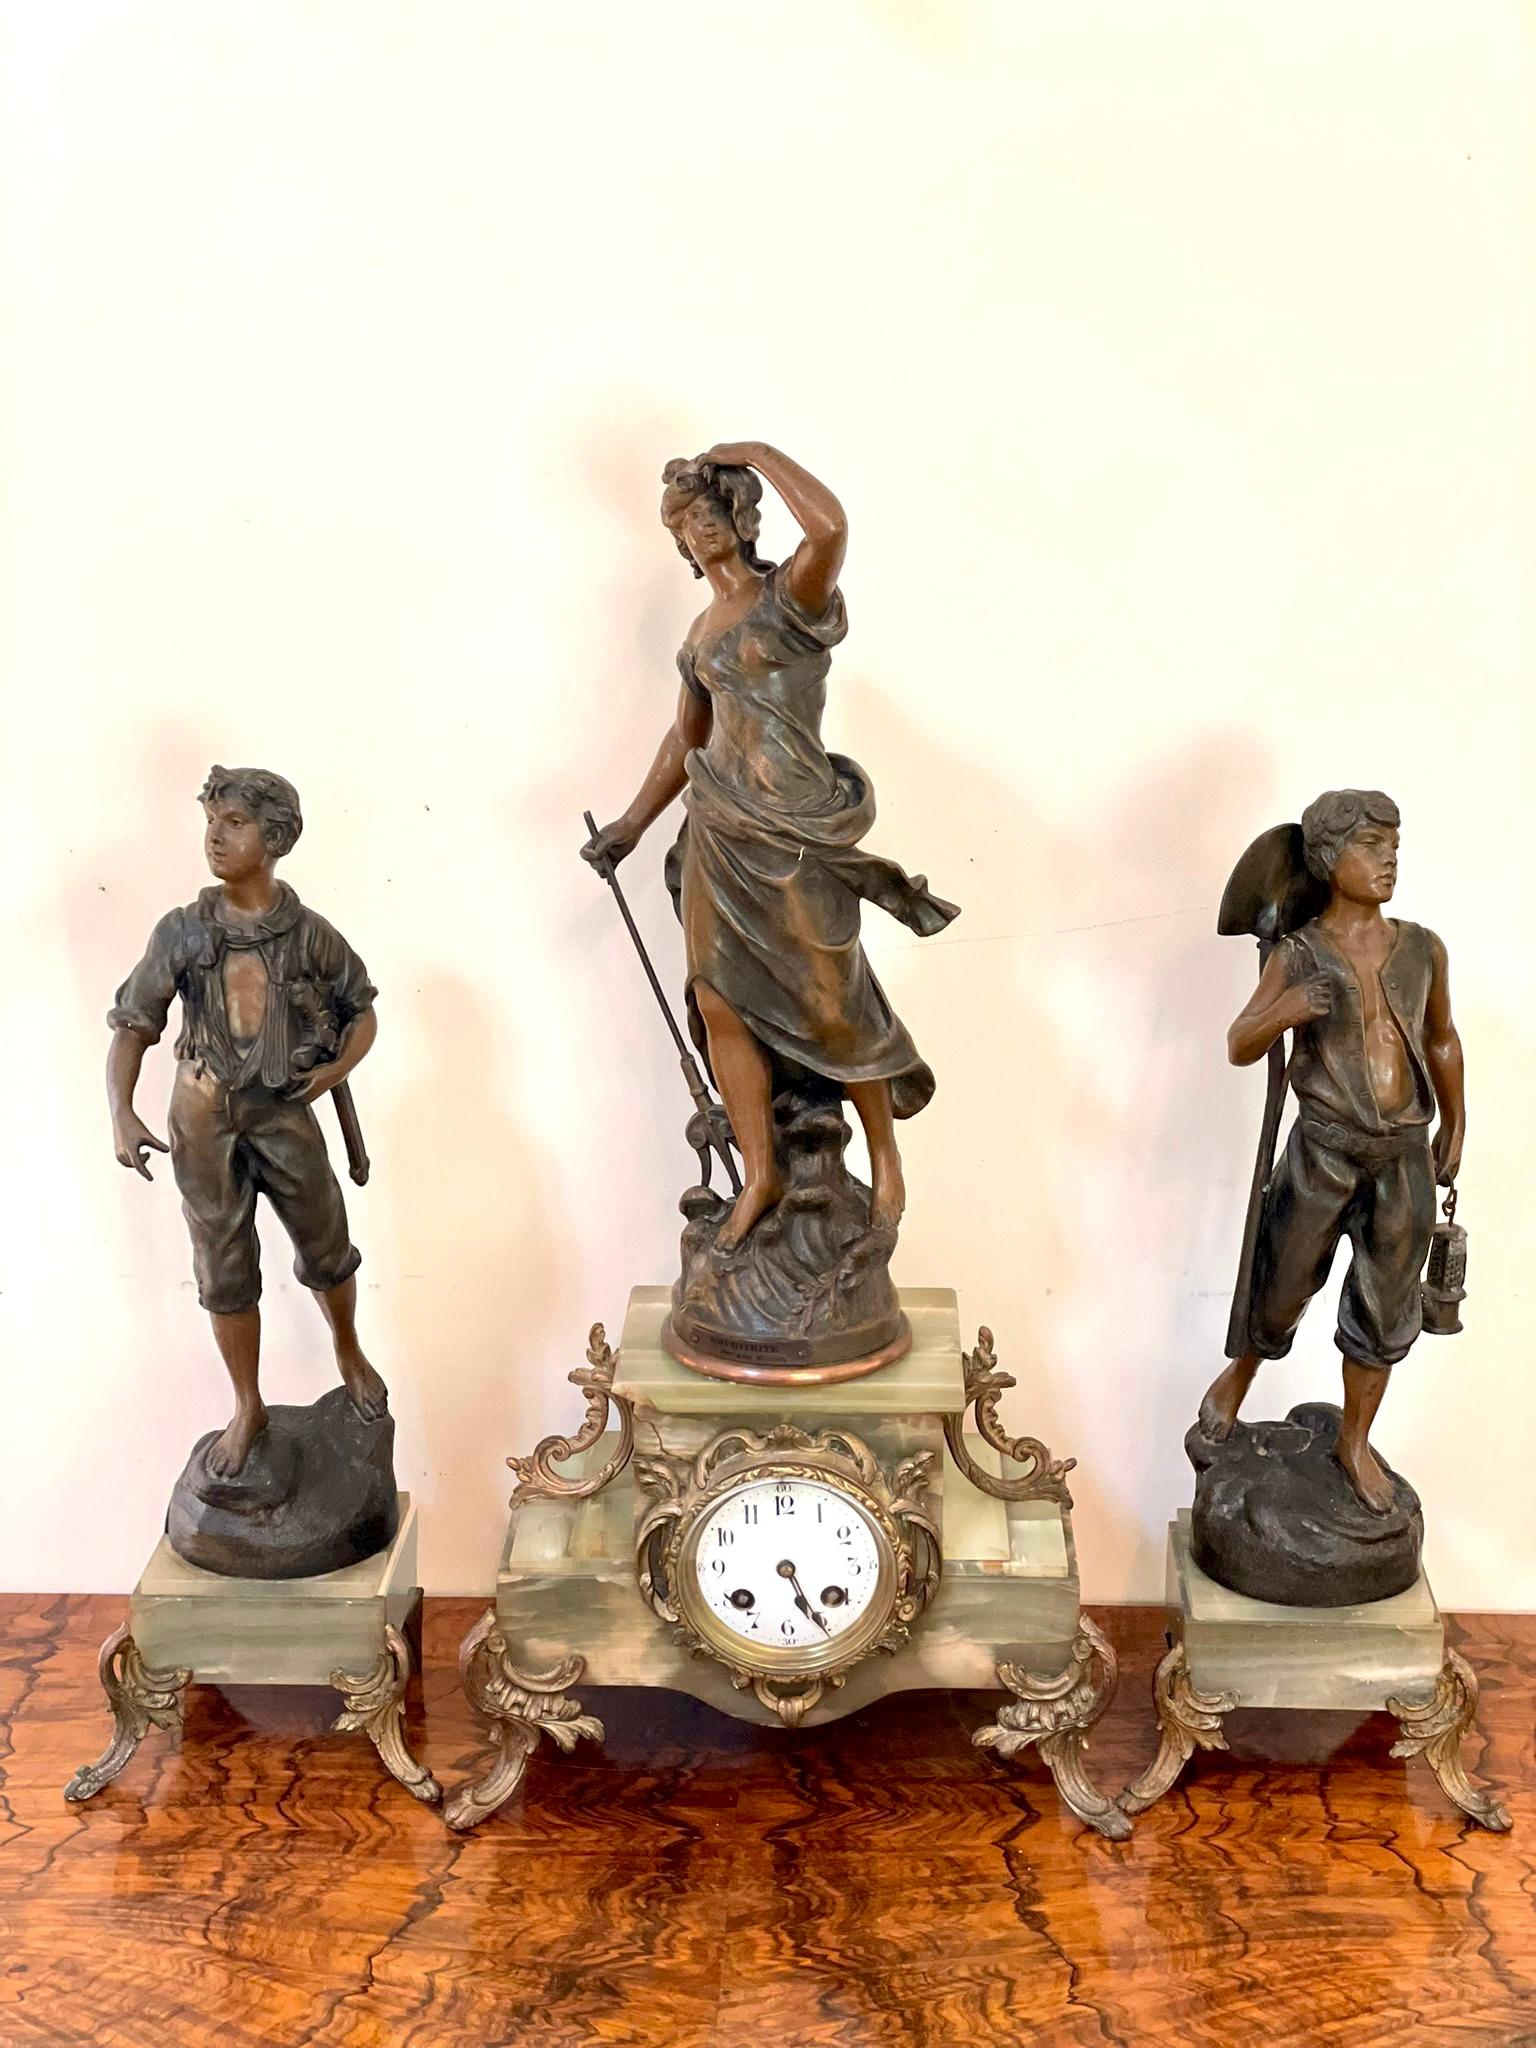 Antique 19th century French spelter and onyx three piece clock garniture having a quality painted dial, original hands and eight day movement striking on the hour and half hour on a bell. A beautiful quality onyx case surmounted by a spelter figure